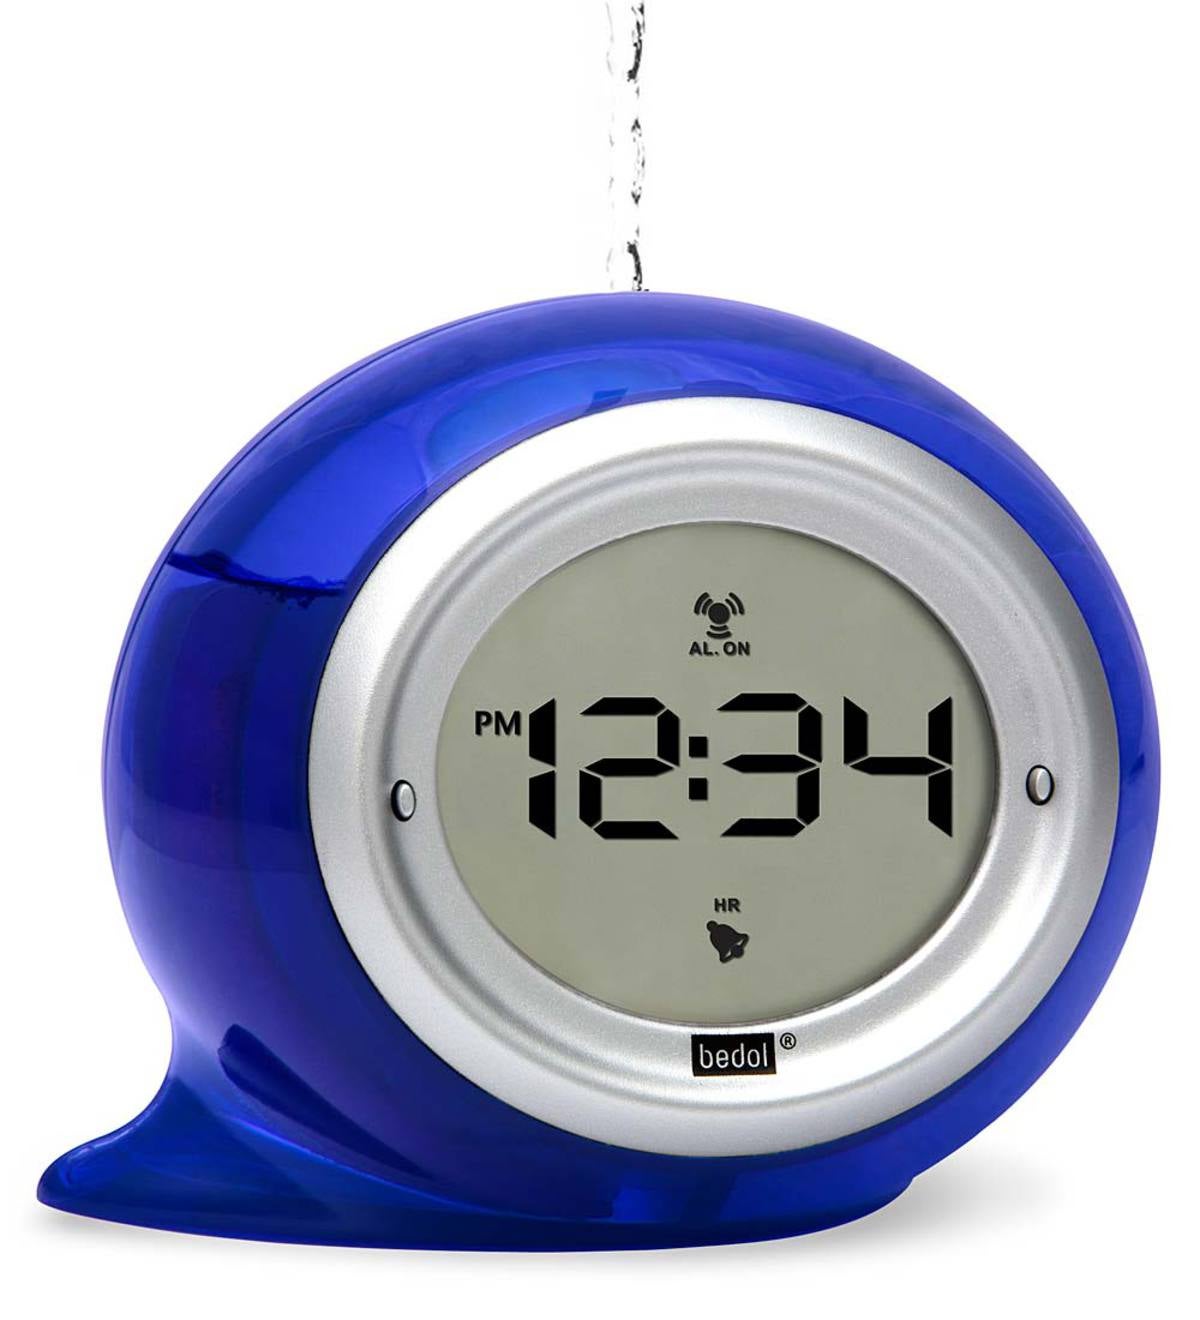 Digital Water Powered Clock with Alarm - Blue